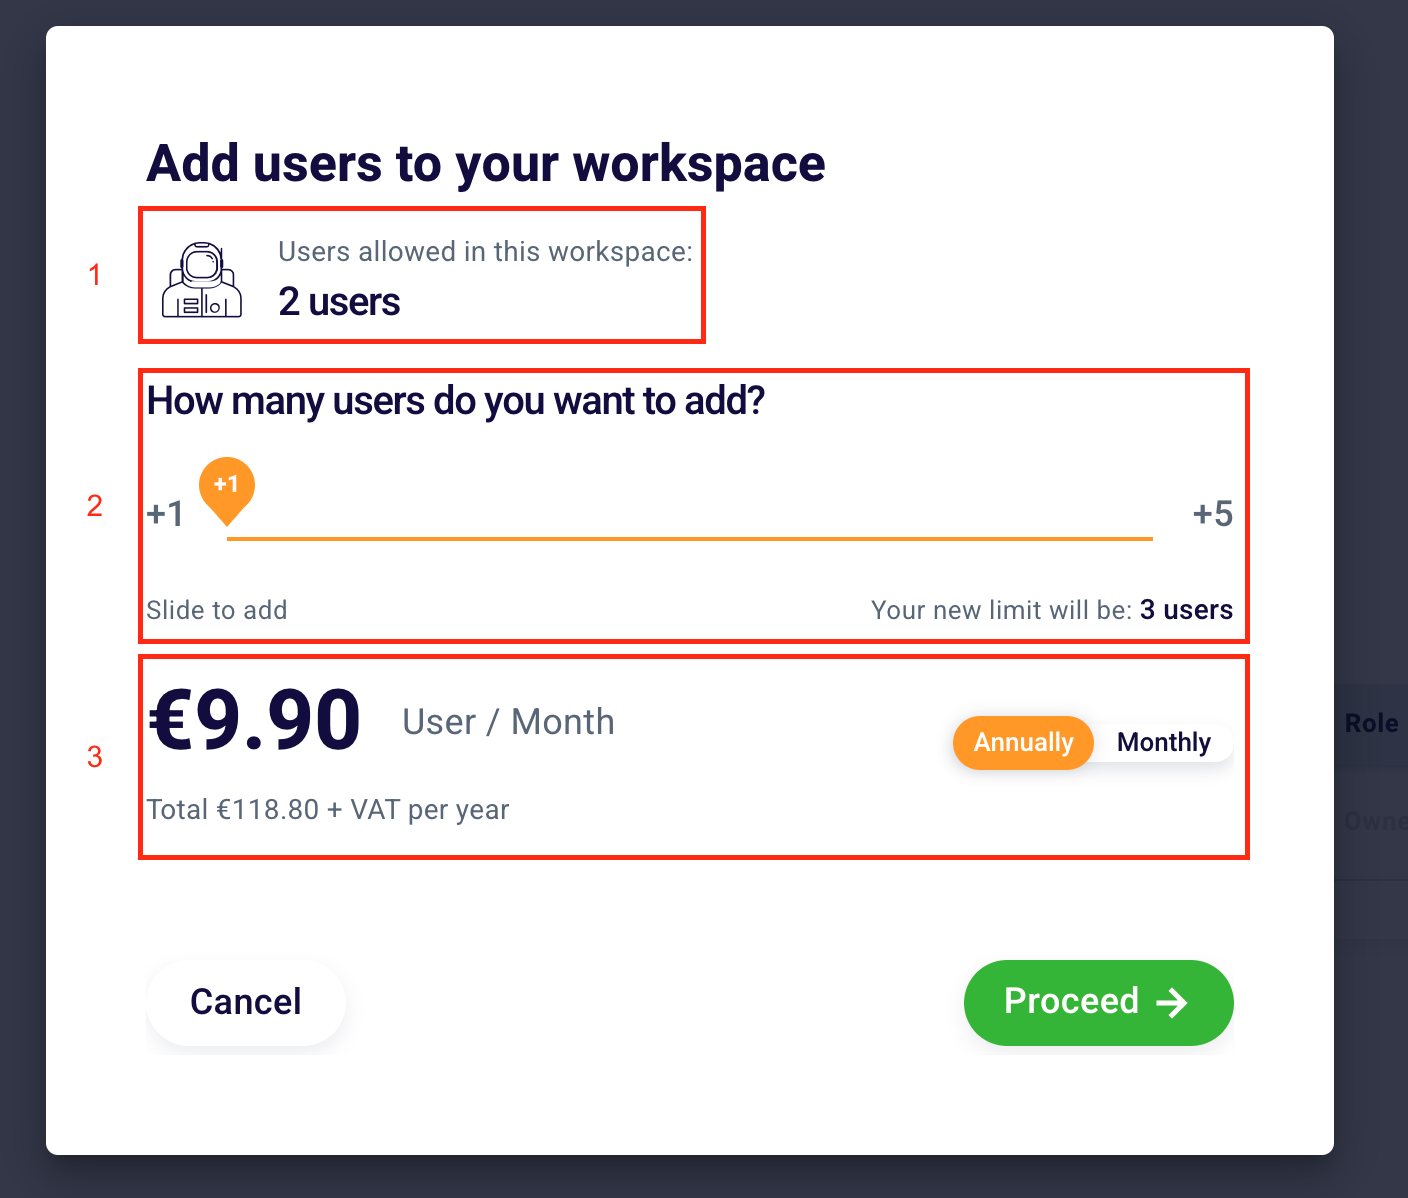 Add users to workspace dialog